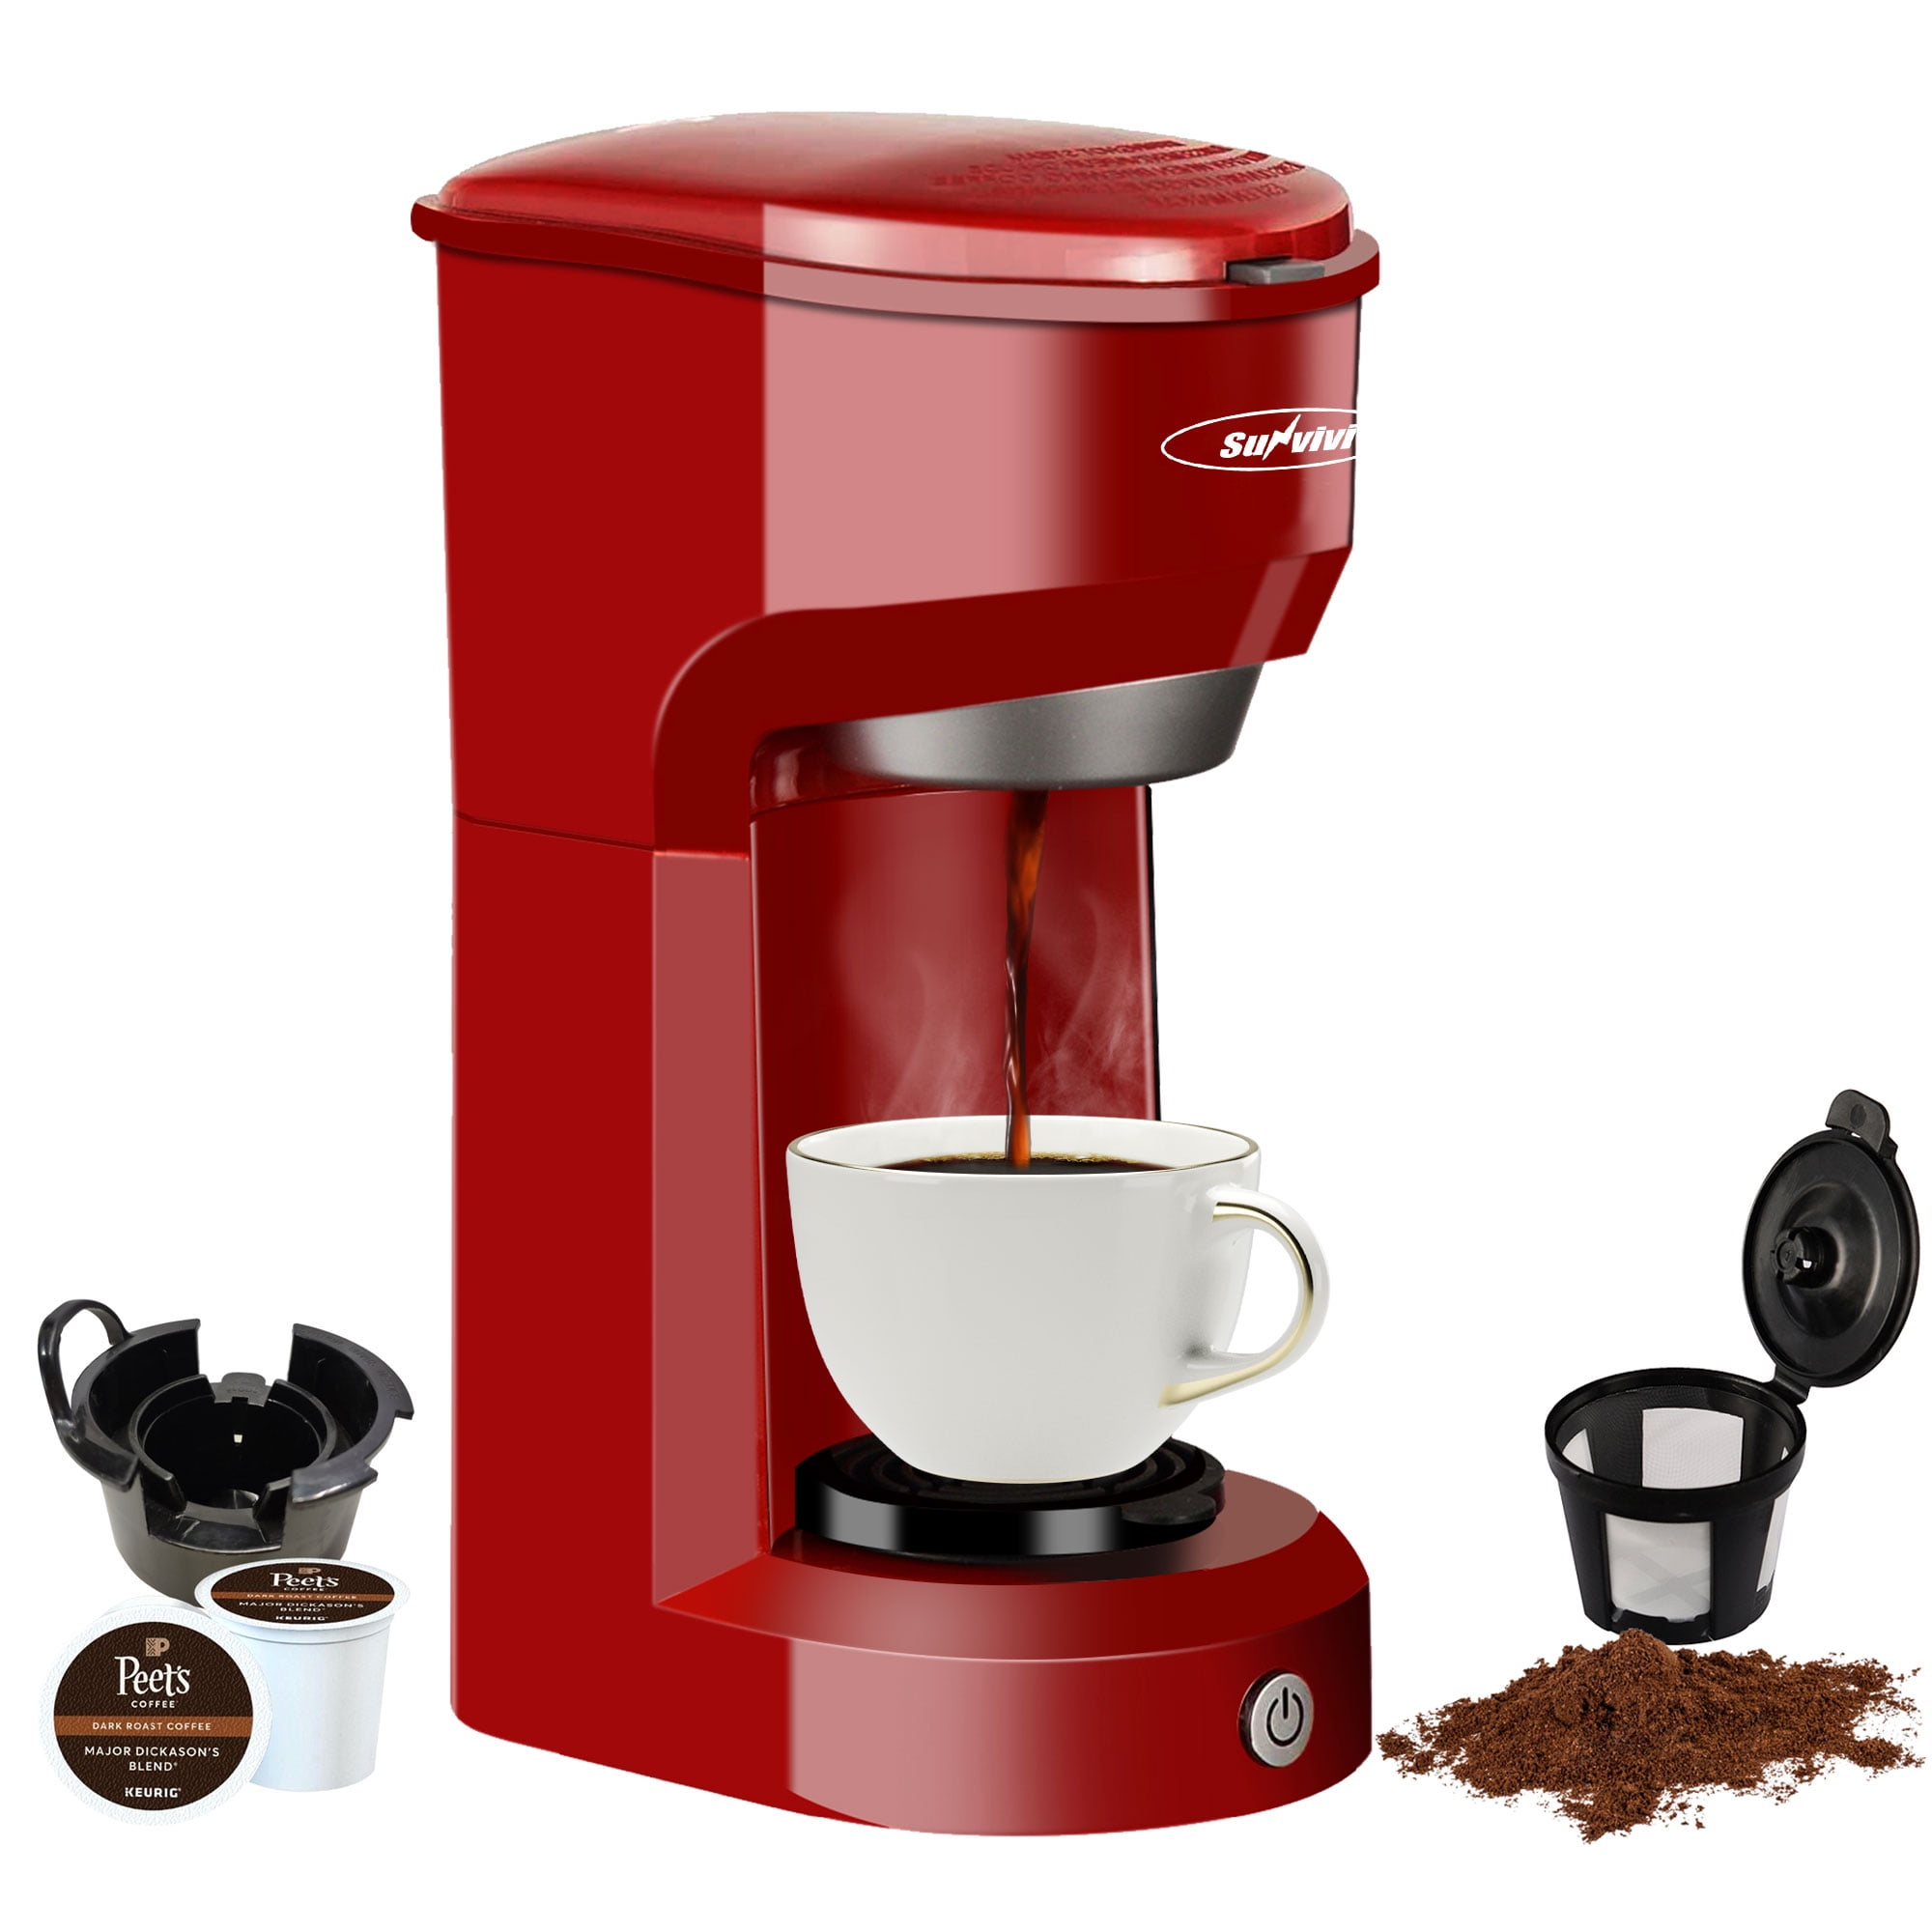 19 Select High-End Coffee Makers for the Perfect Cup of Joe